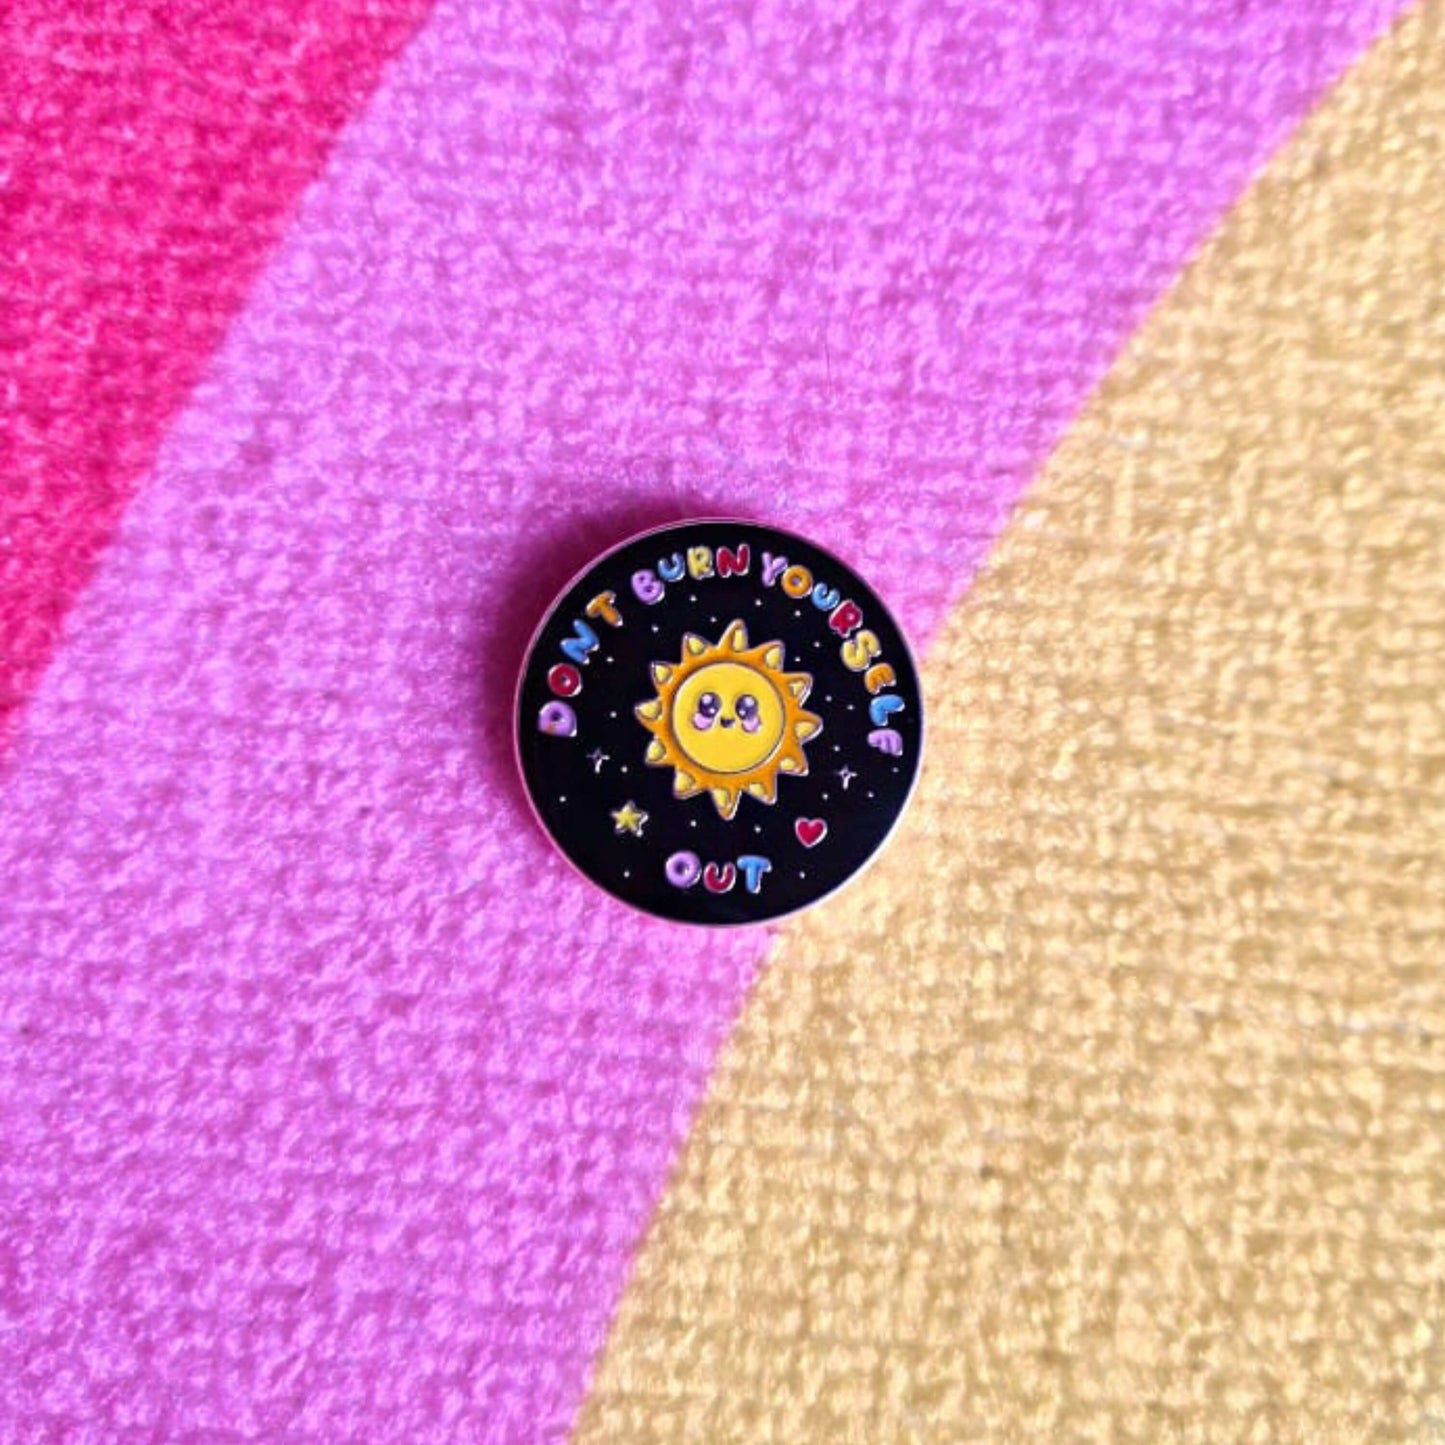 The Don't Burn Yourself Out Sunshine Enamel Pin on a rainbow fluffy rug. The circle shaped pin badge is a black base with a yellow smiling sunshine in the centre with rainbow text surrounding it reading 'don't burn yourself out' along with a red heart, yellow star and silver sparkles. The design was created as a gentle reminder to practise self care.